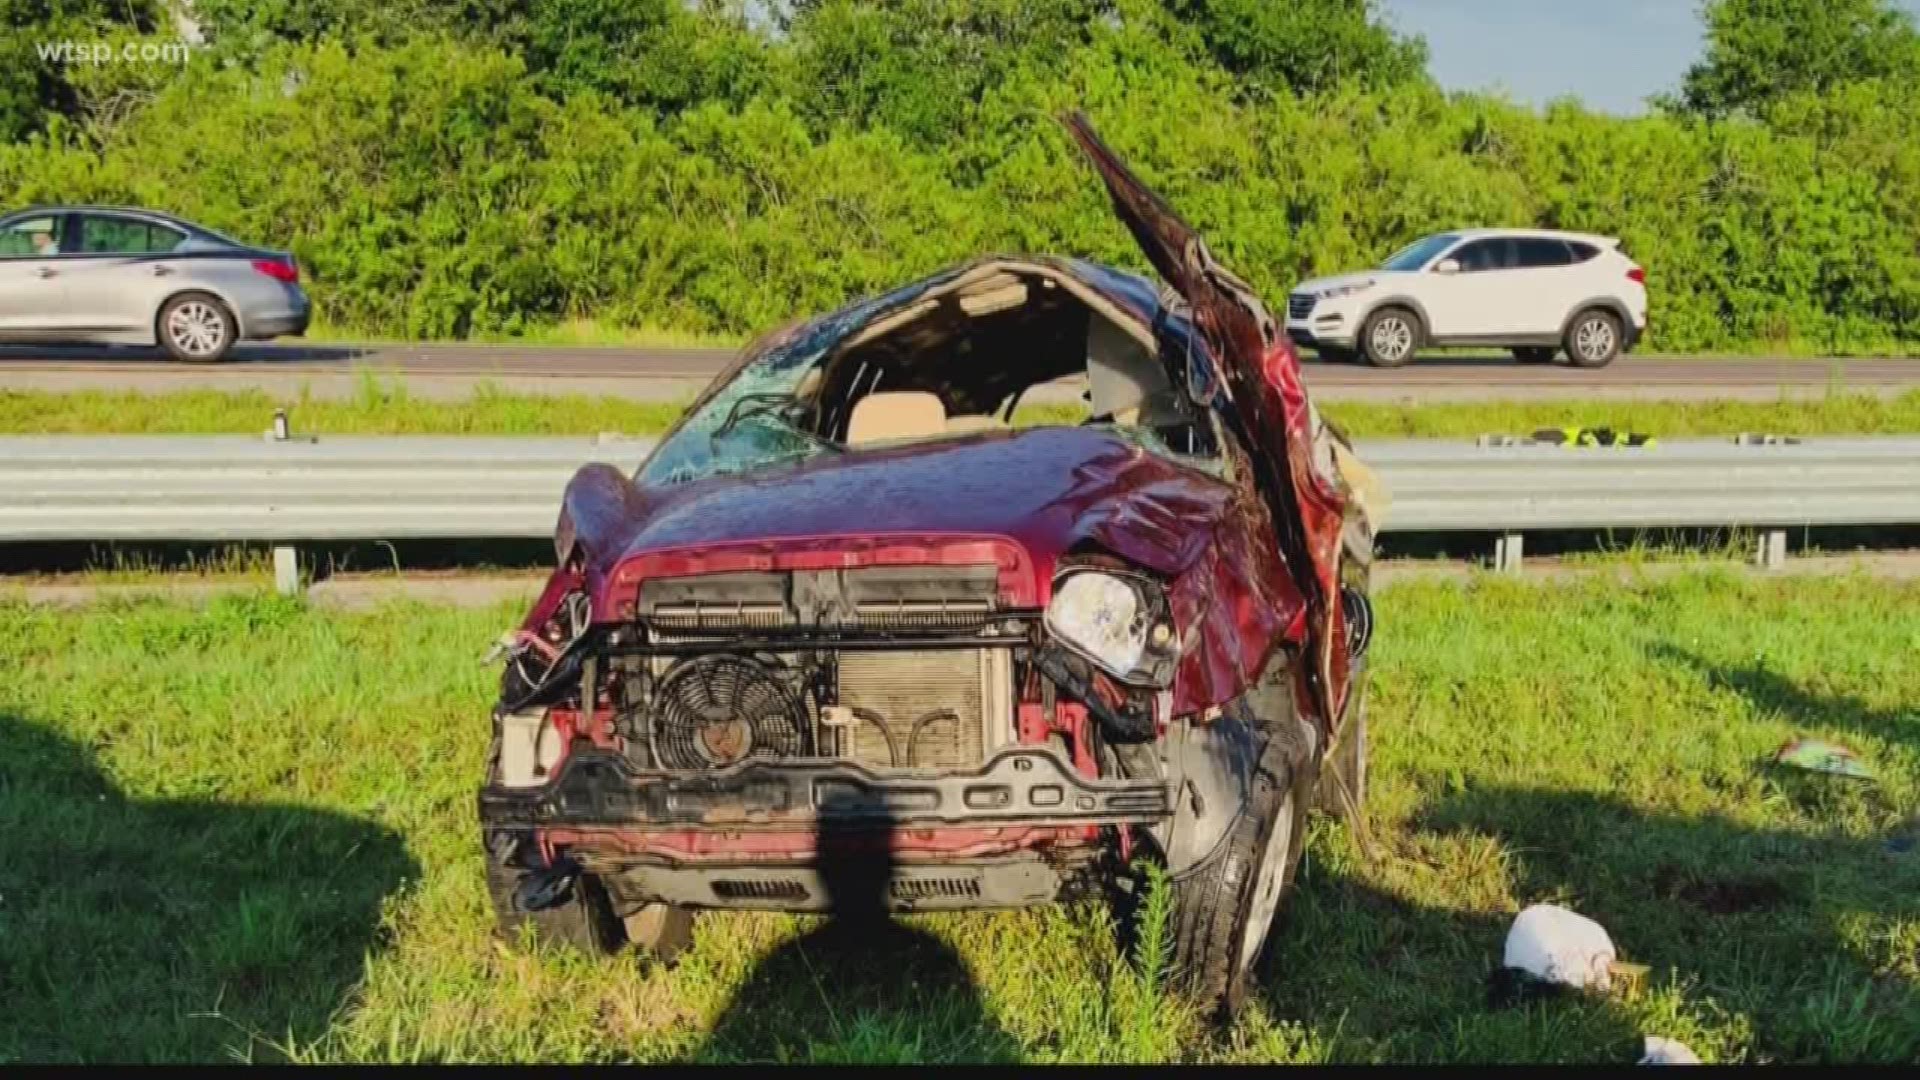 The Florida Highway Patrol said after she made the gestures, she lost control of her SUV and crashed. She later died, and her two kids were hurt.